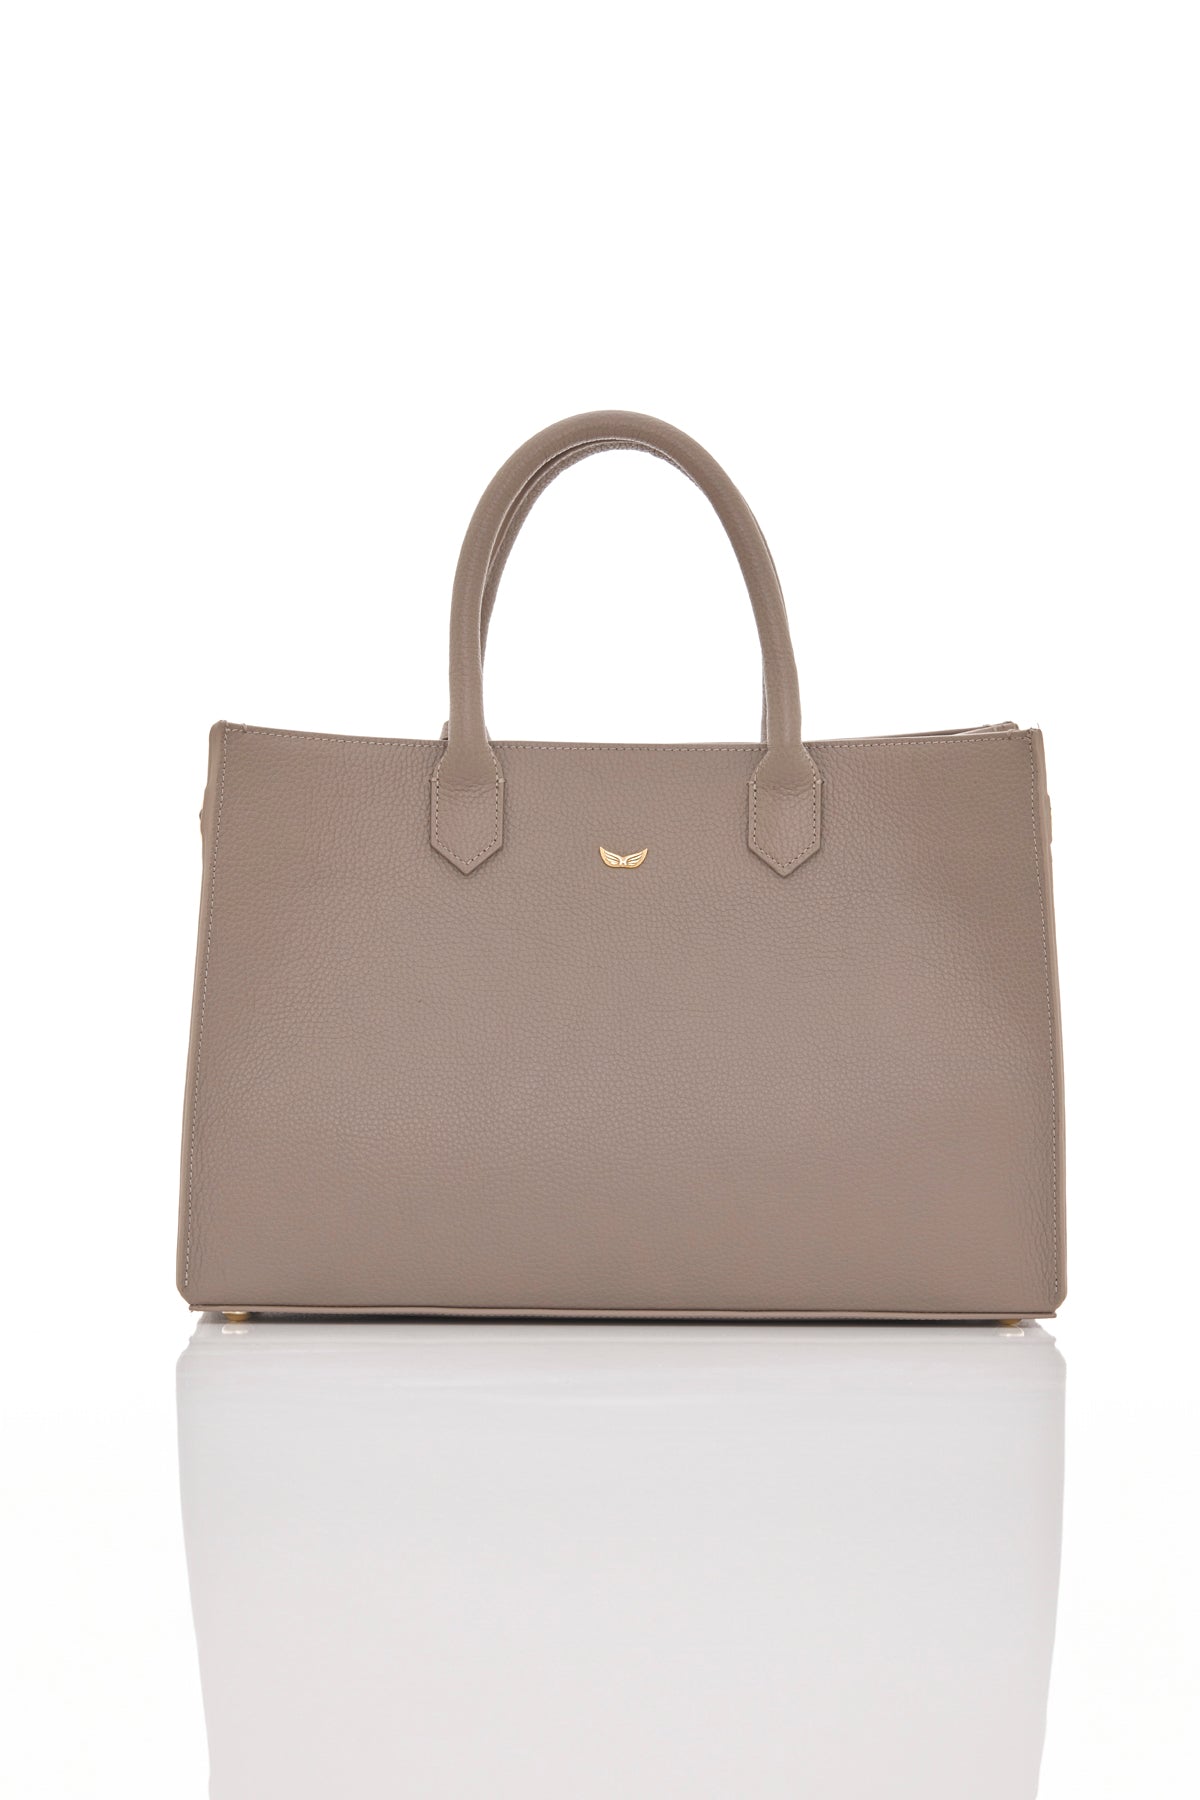 taupe ouroboros genuine leather women's tote bag back